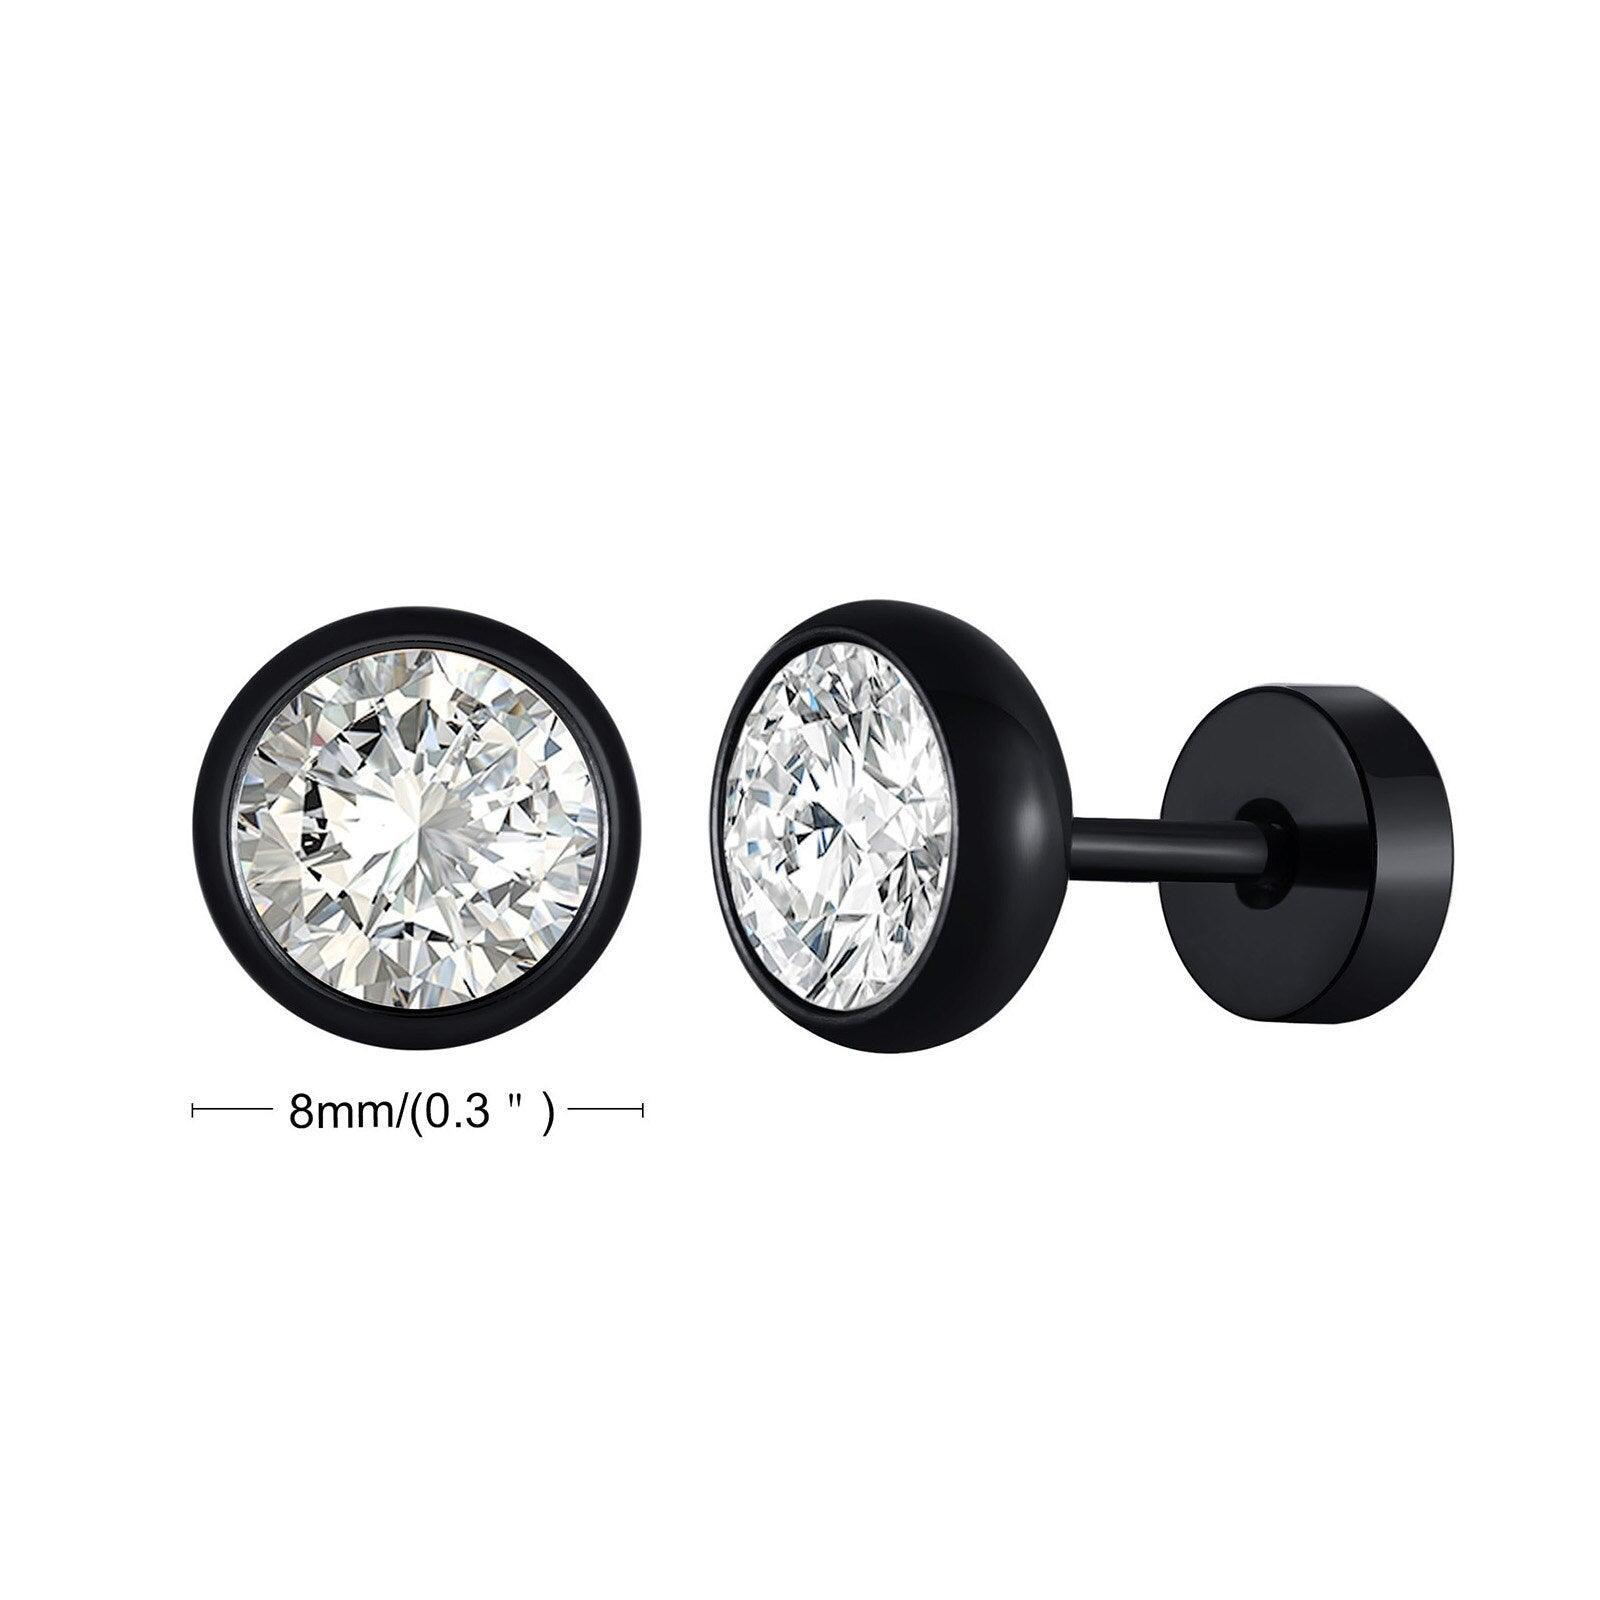 Men's Jewelry - Earrings Mens Stainless Steel Studded Earrings With Gold Black Silver...